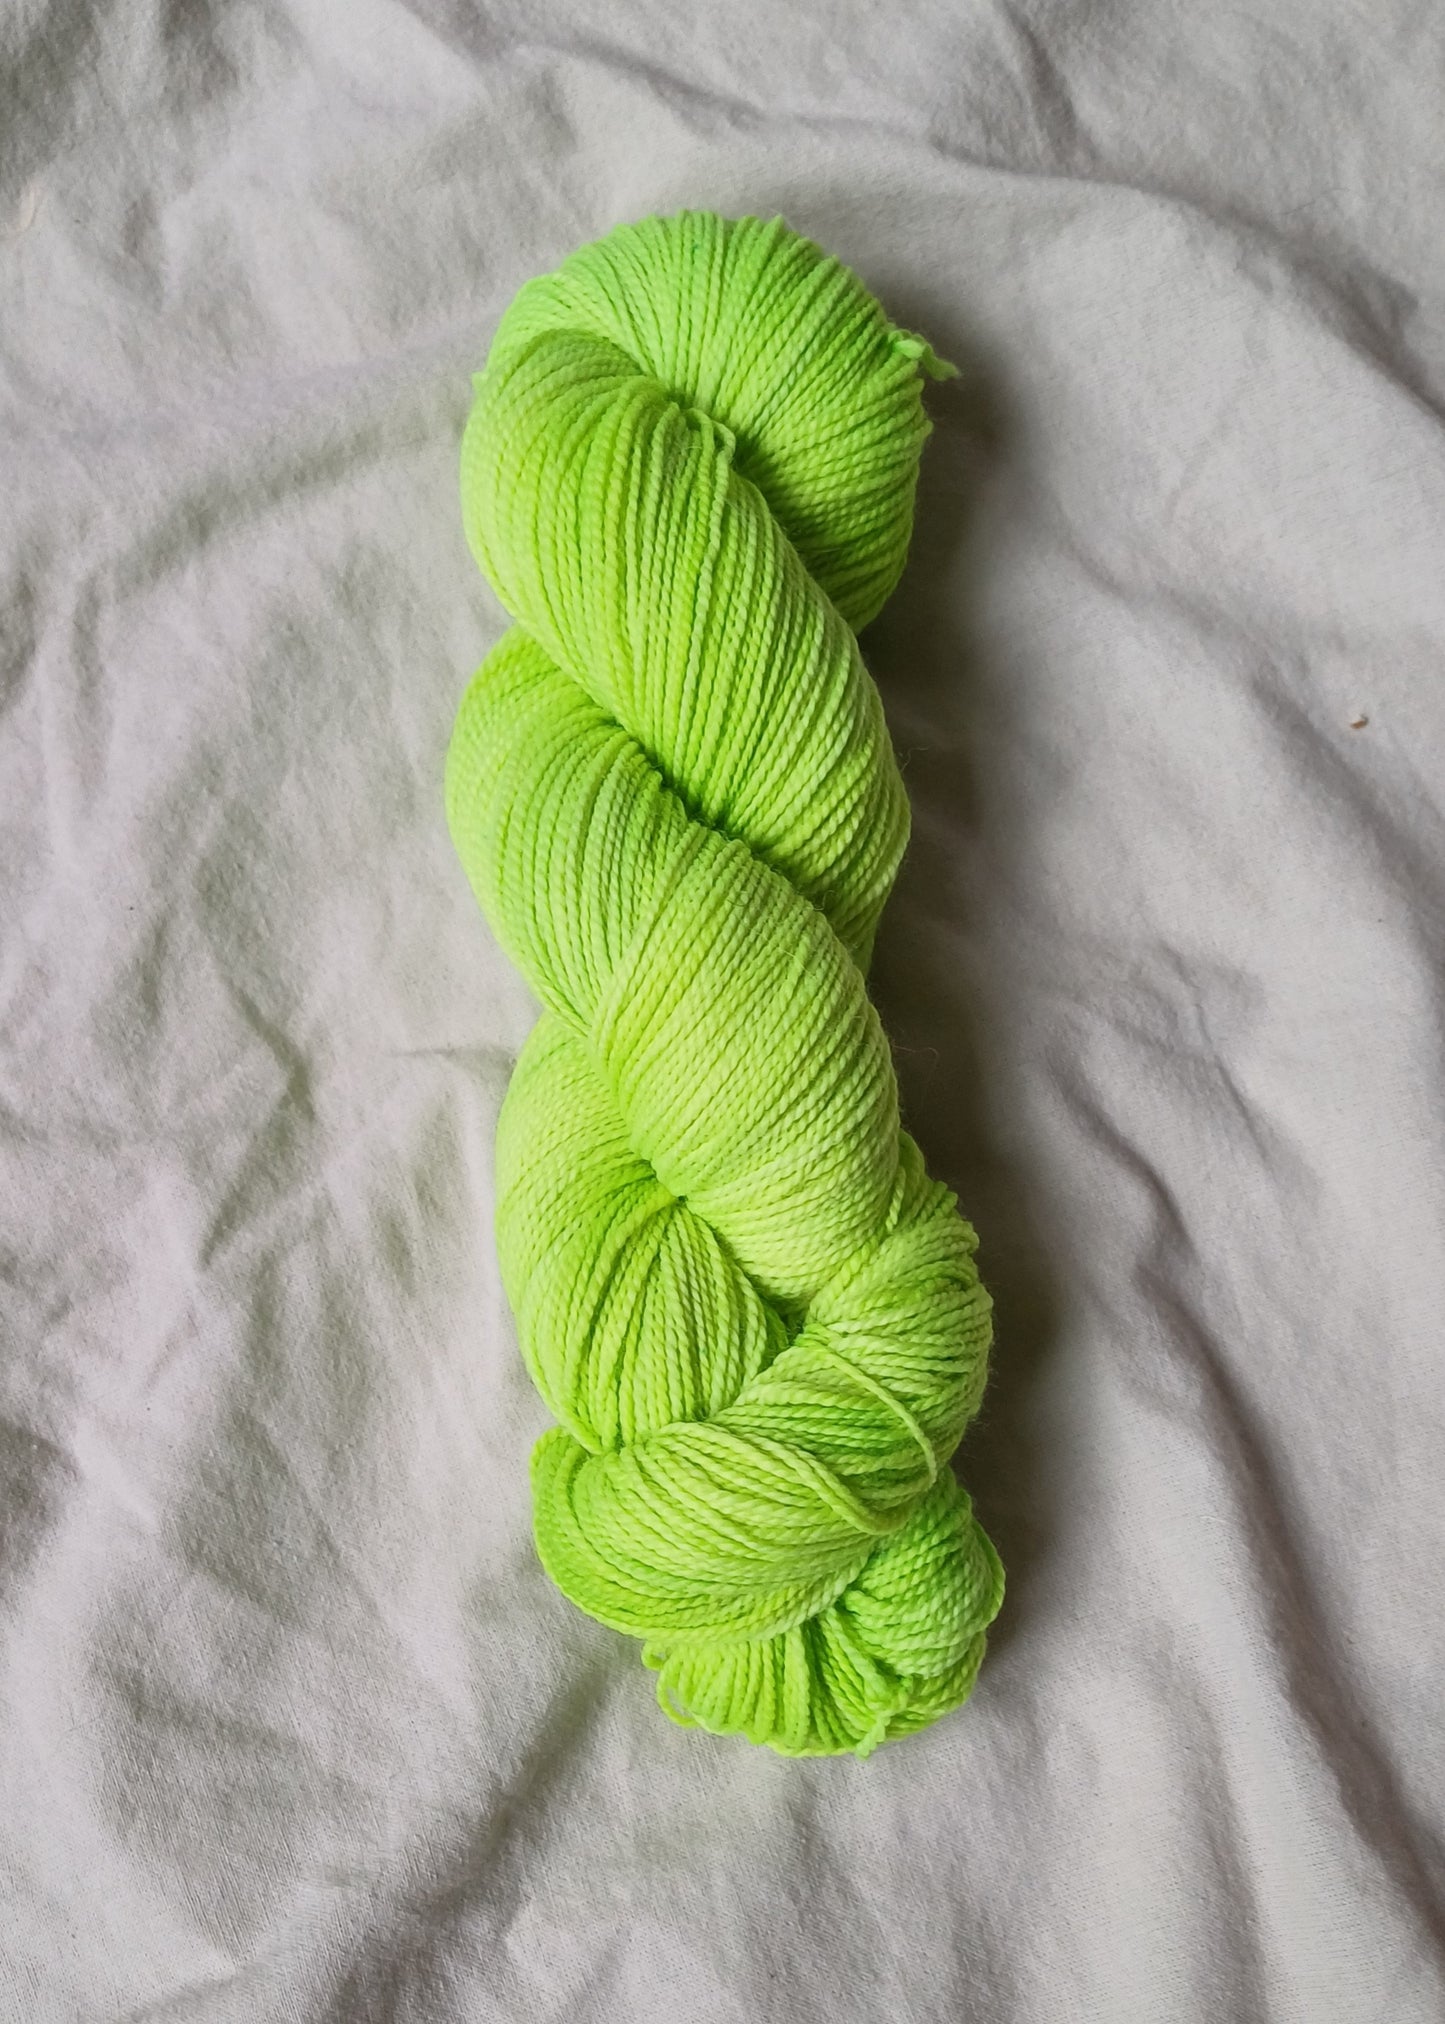 The Neon Edit "Midnight on the Dancefloor" in Frog Mouse Twisty Sock